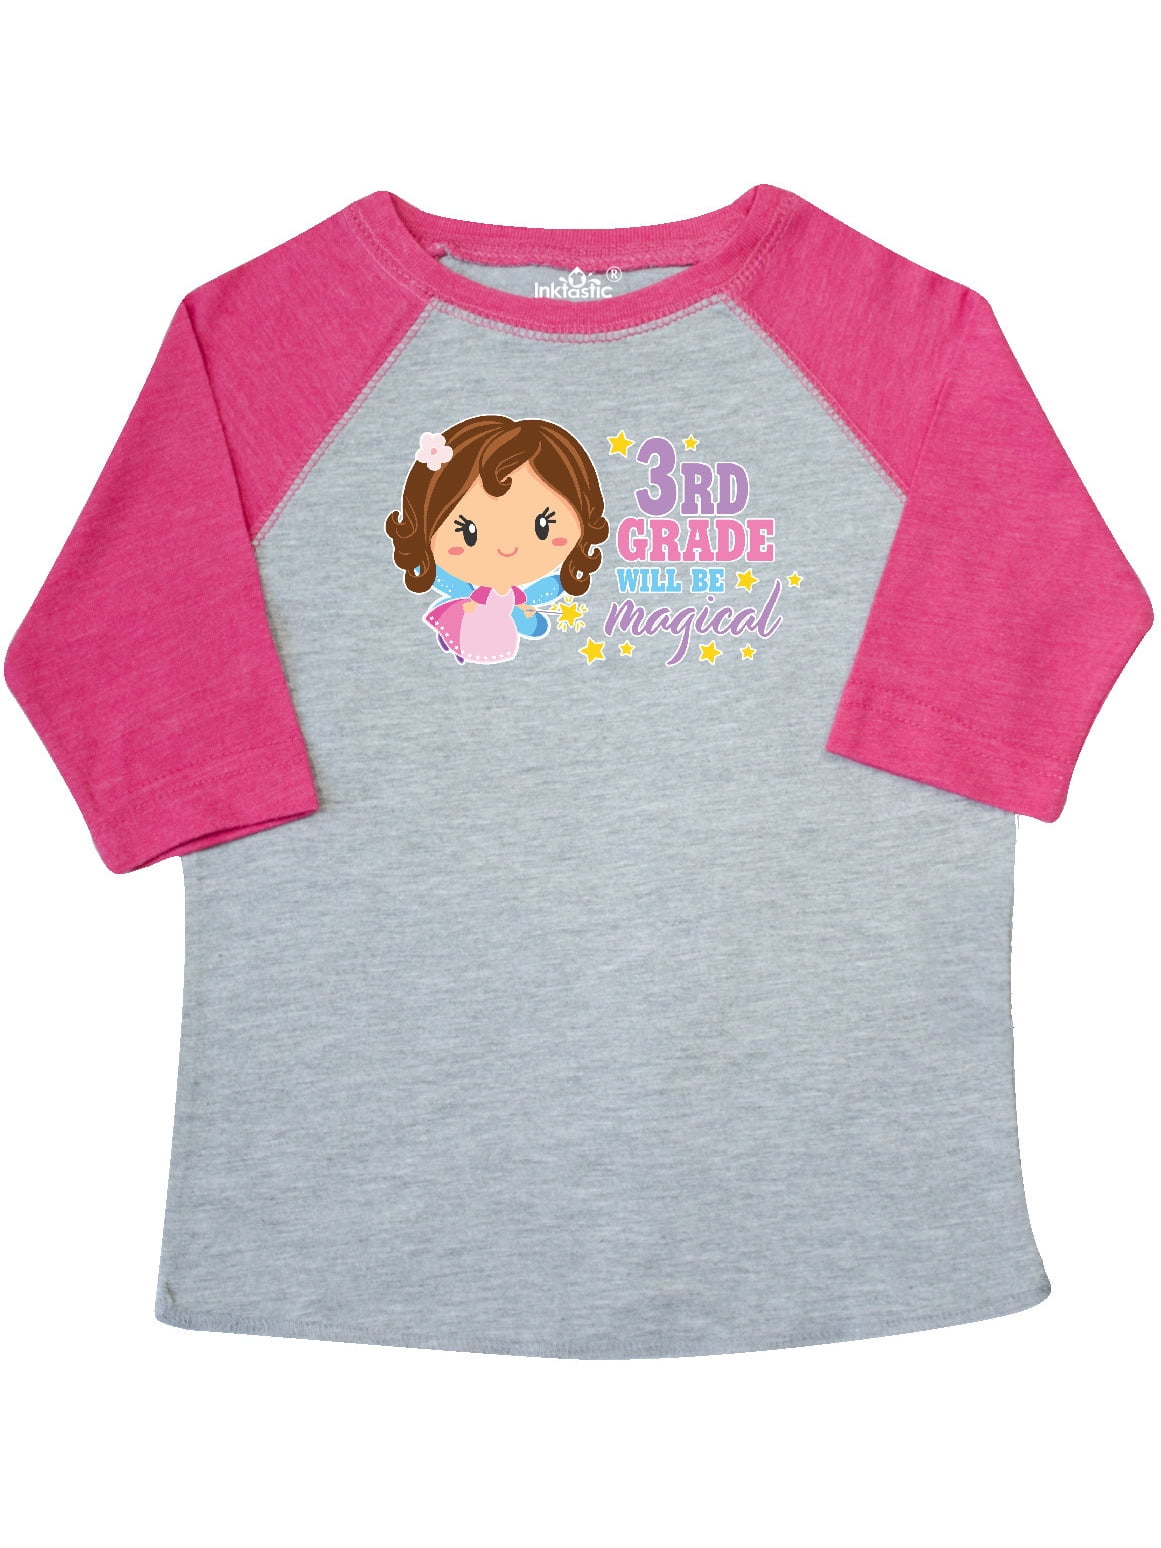 inktastic 3rd Grade Will Be Magical with Brown Haired Fairy Toddler T-Shirt